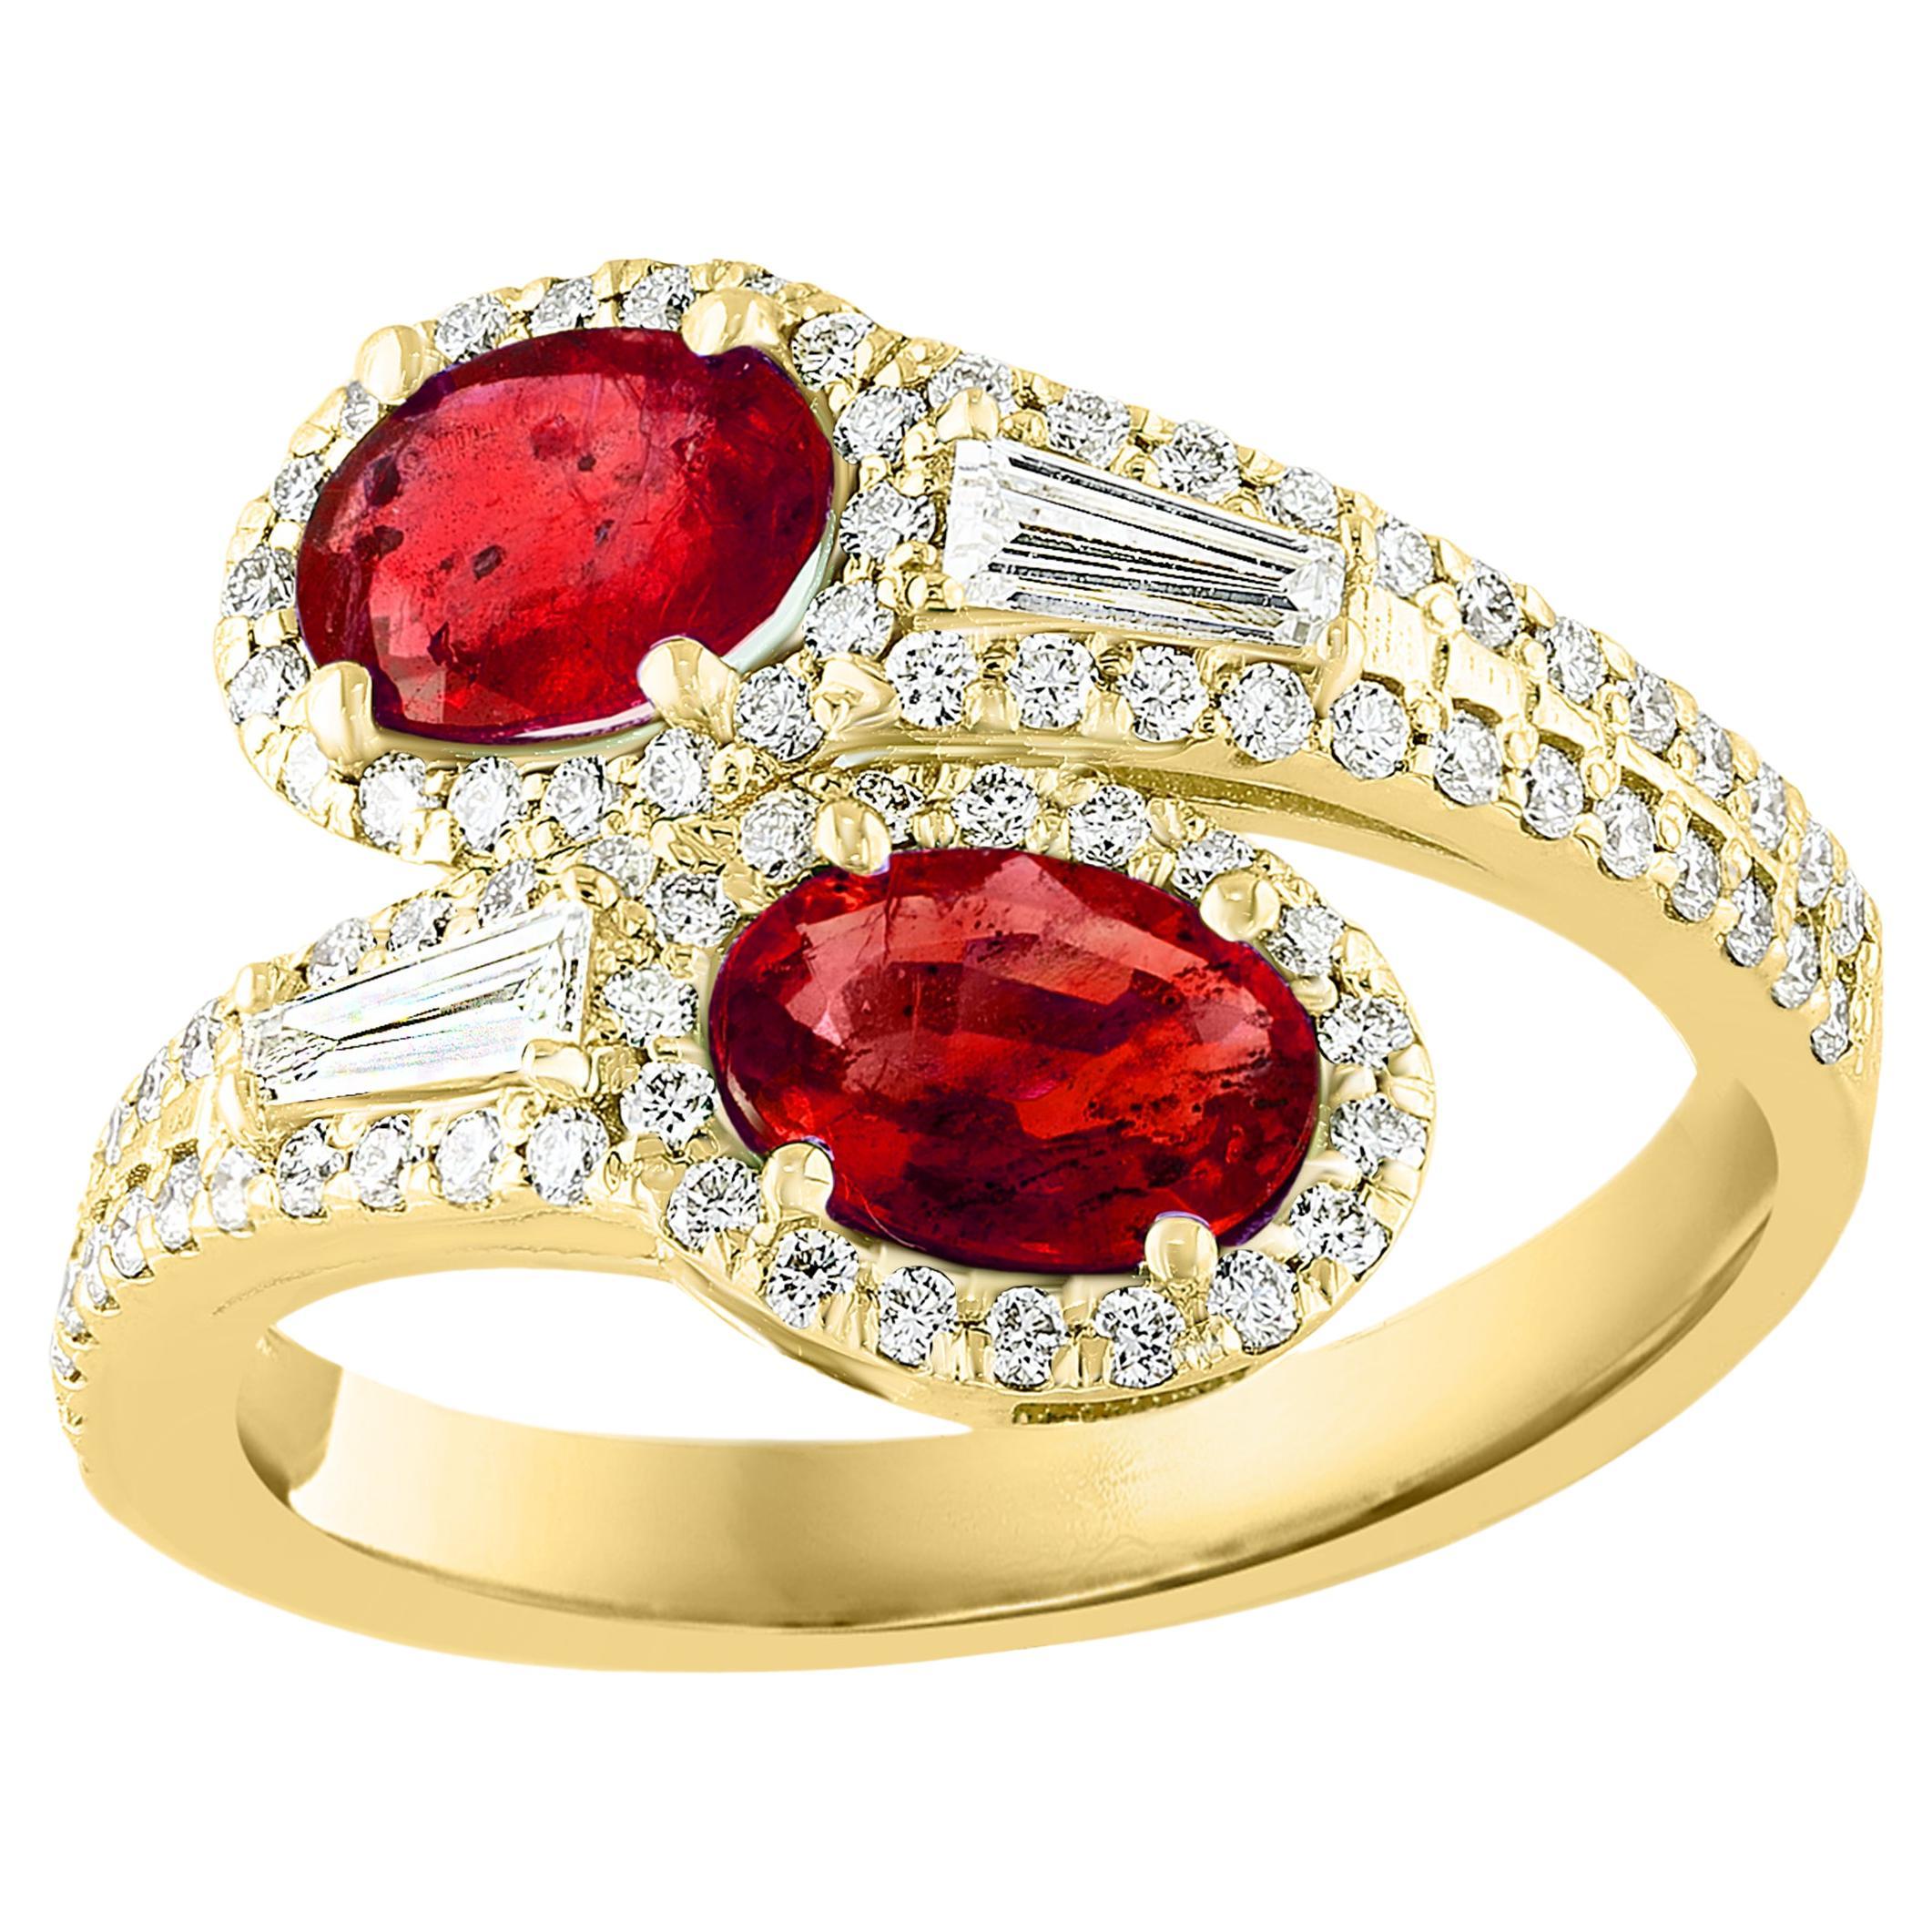 1.67 Carat Oval Cut Ruby Diamond Toi Et Moi Engagement Ring 14K Yellow Gold